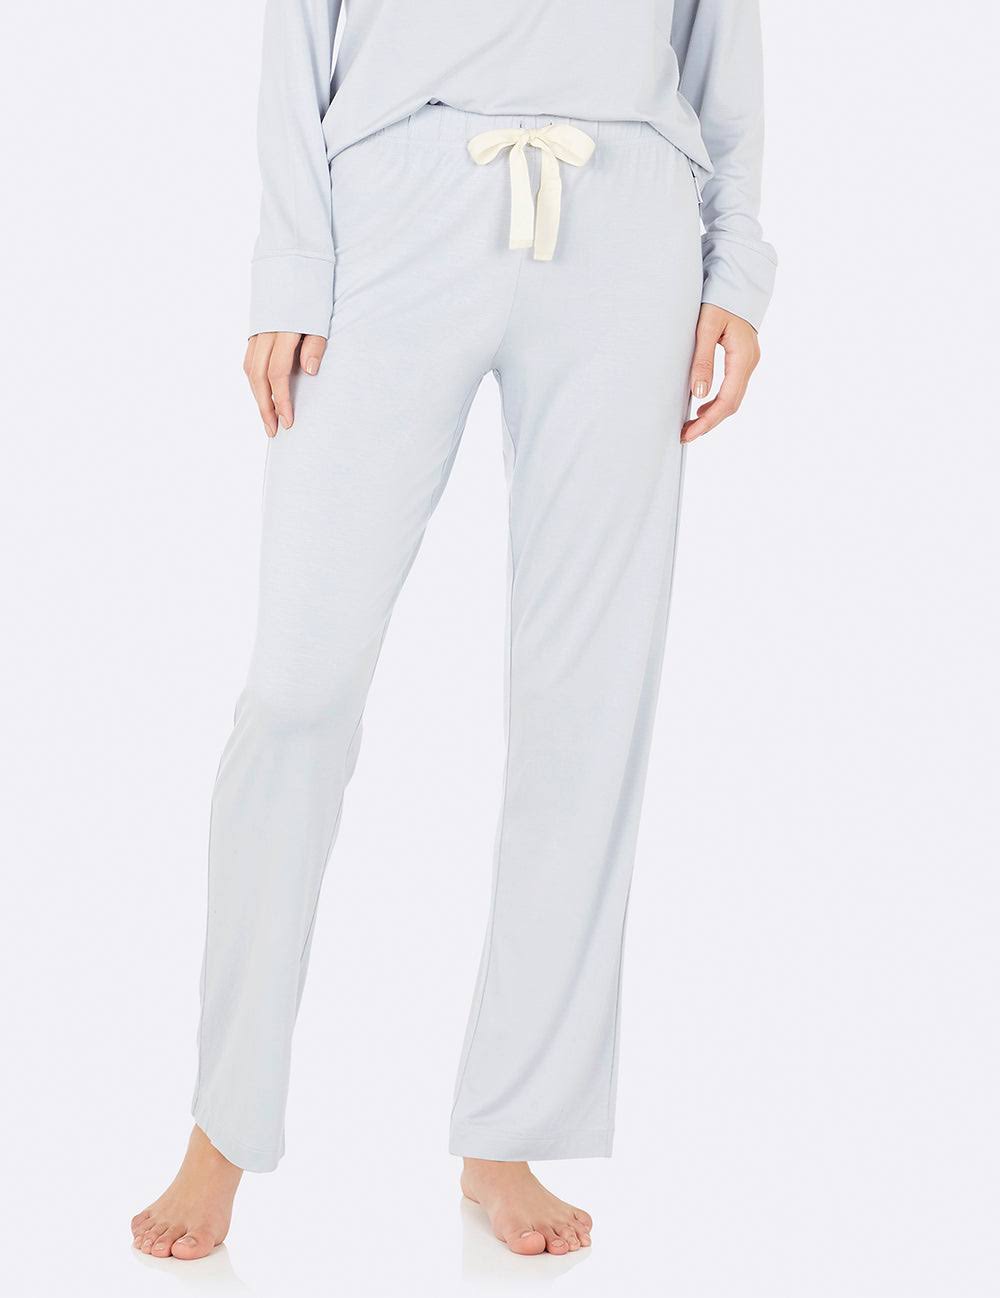 Boody | Goodnight Sleep Pant in Dove | Size L